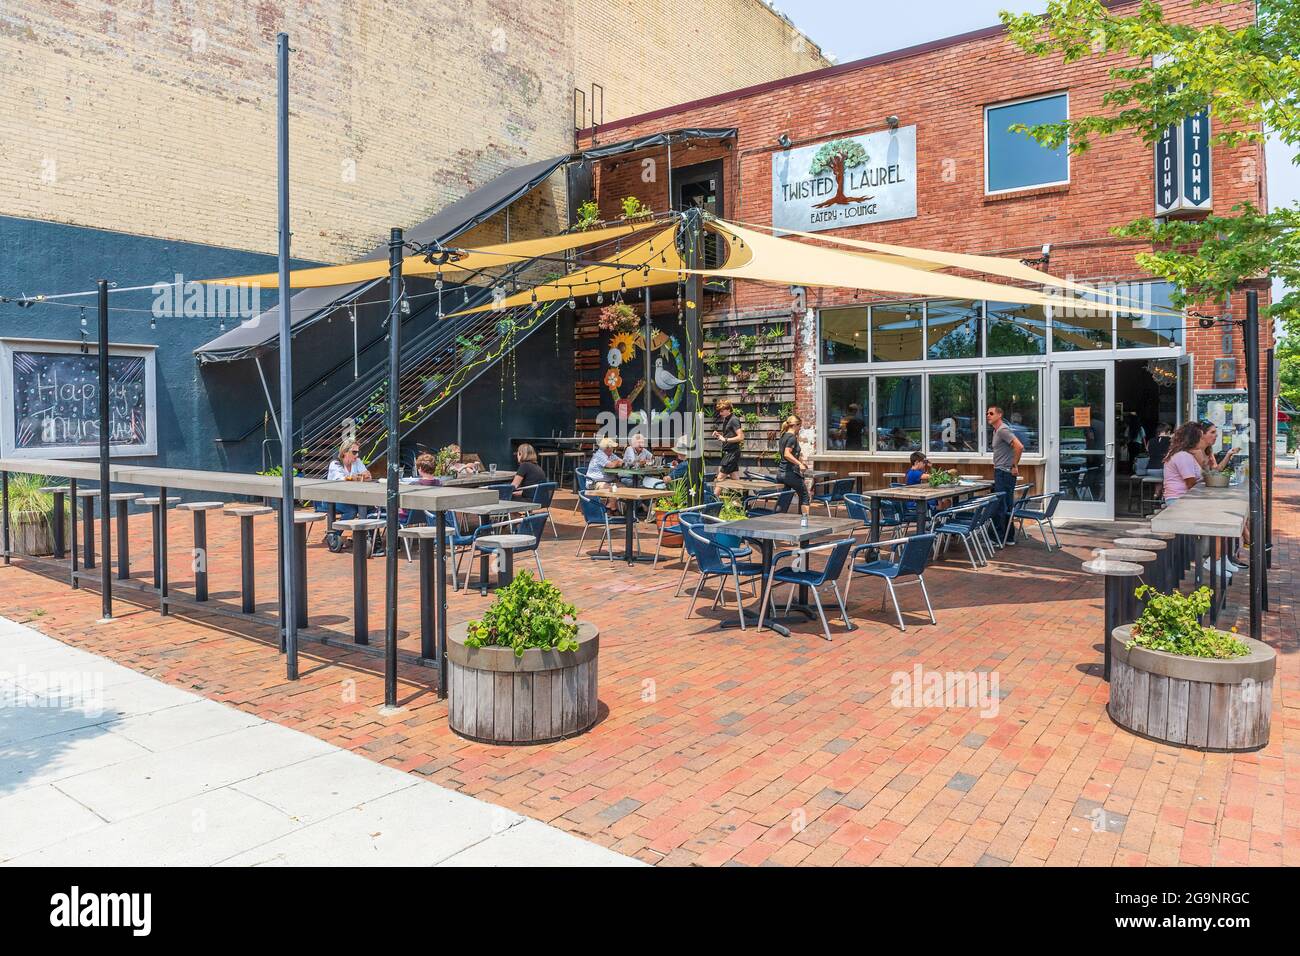 ASHEVILLE, NC, USA-22 JULY 2021: The Twisted Laurel Eatery and Lounge, showing outside seating with customers on a sunny day. Stock Photo